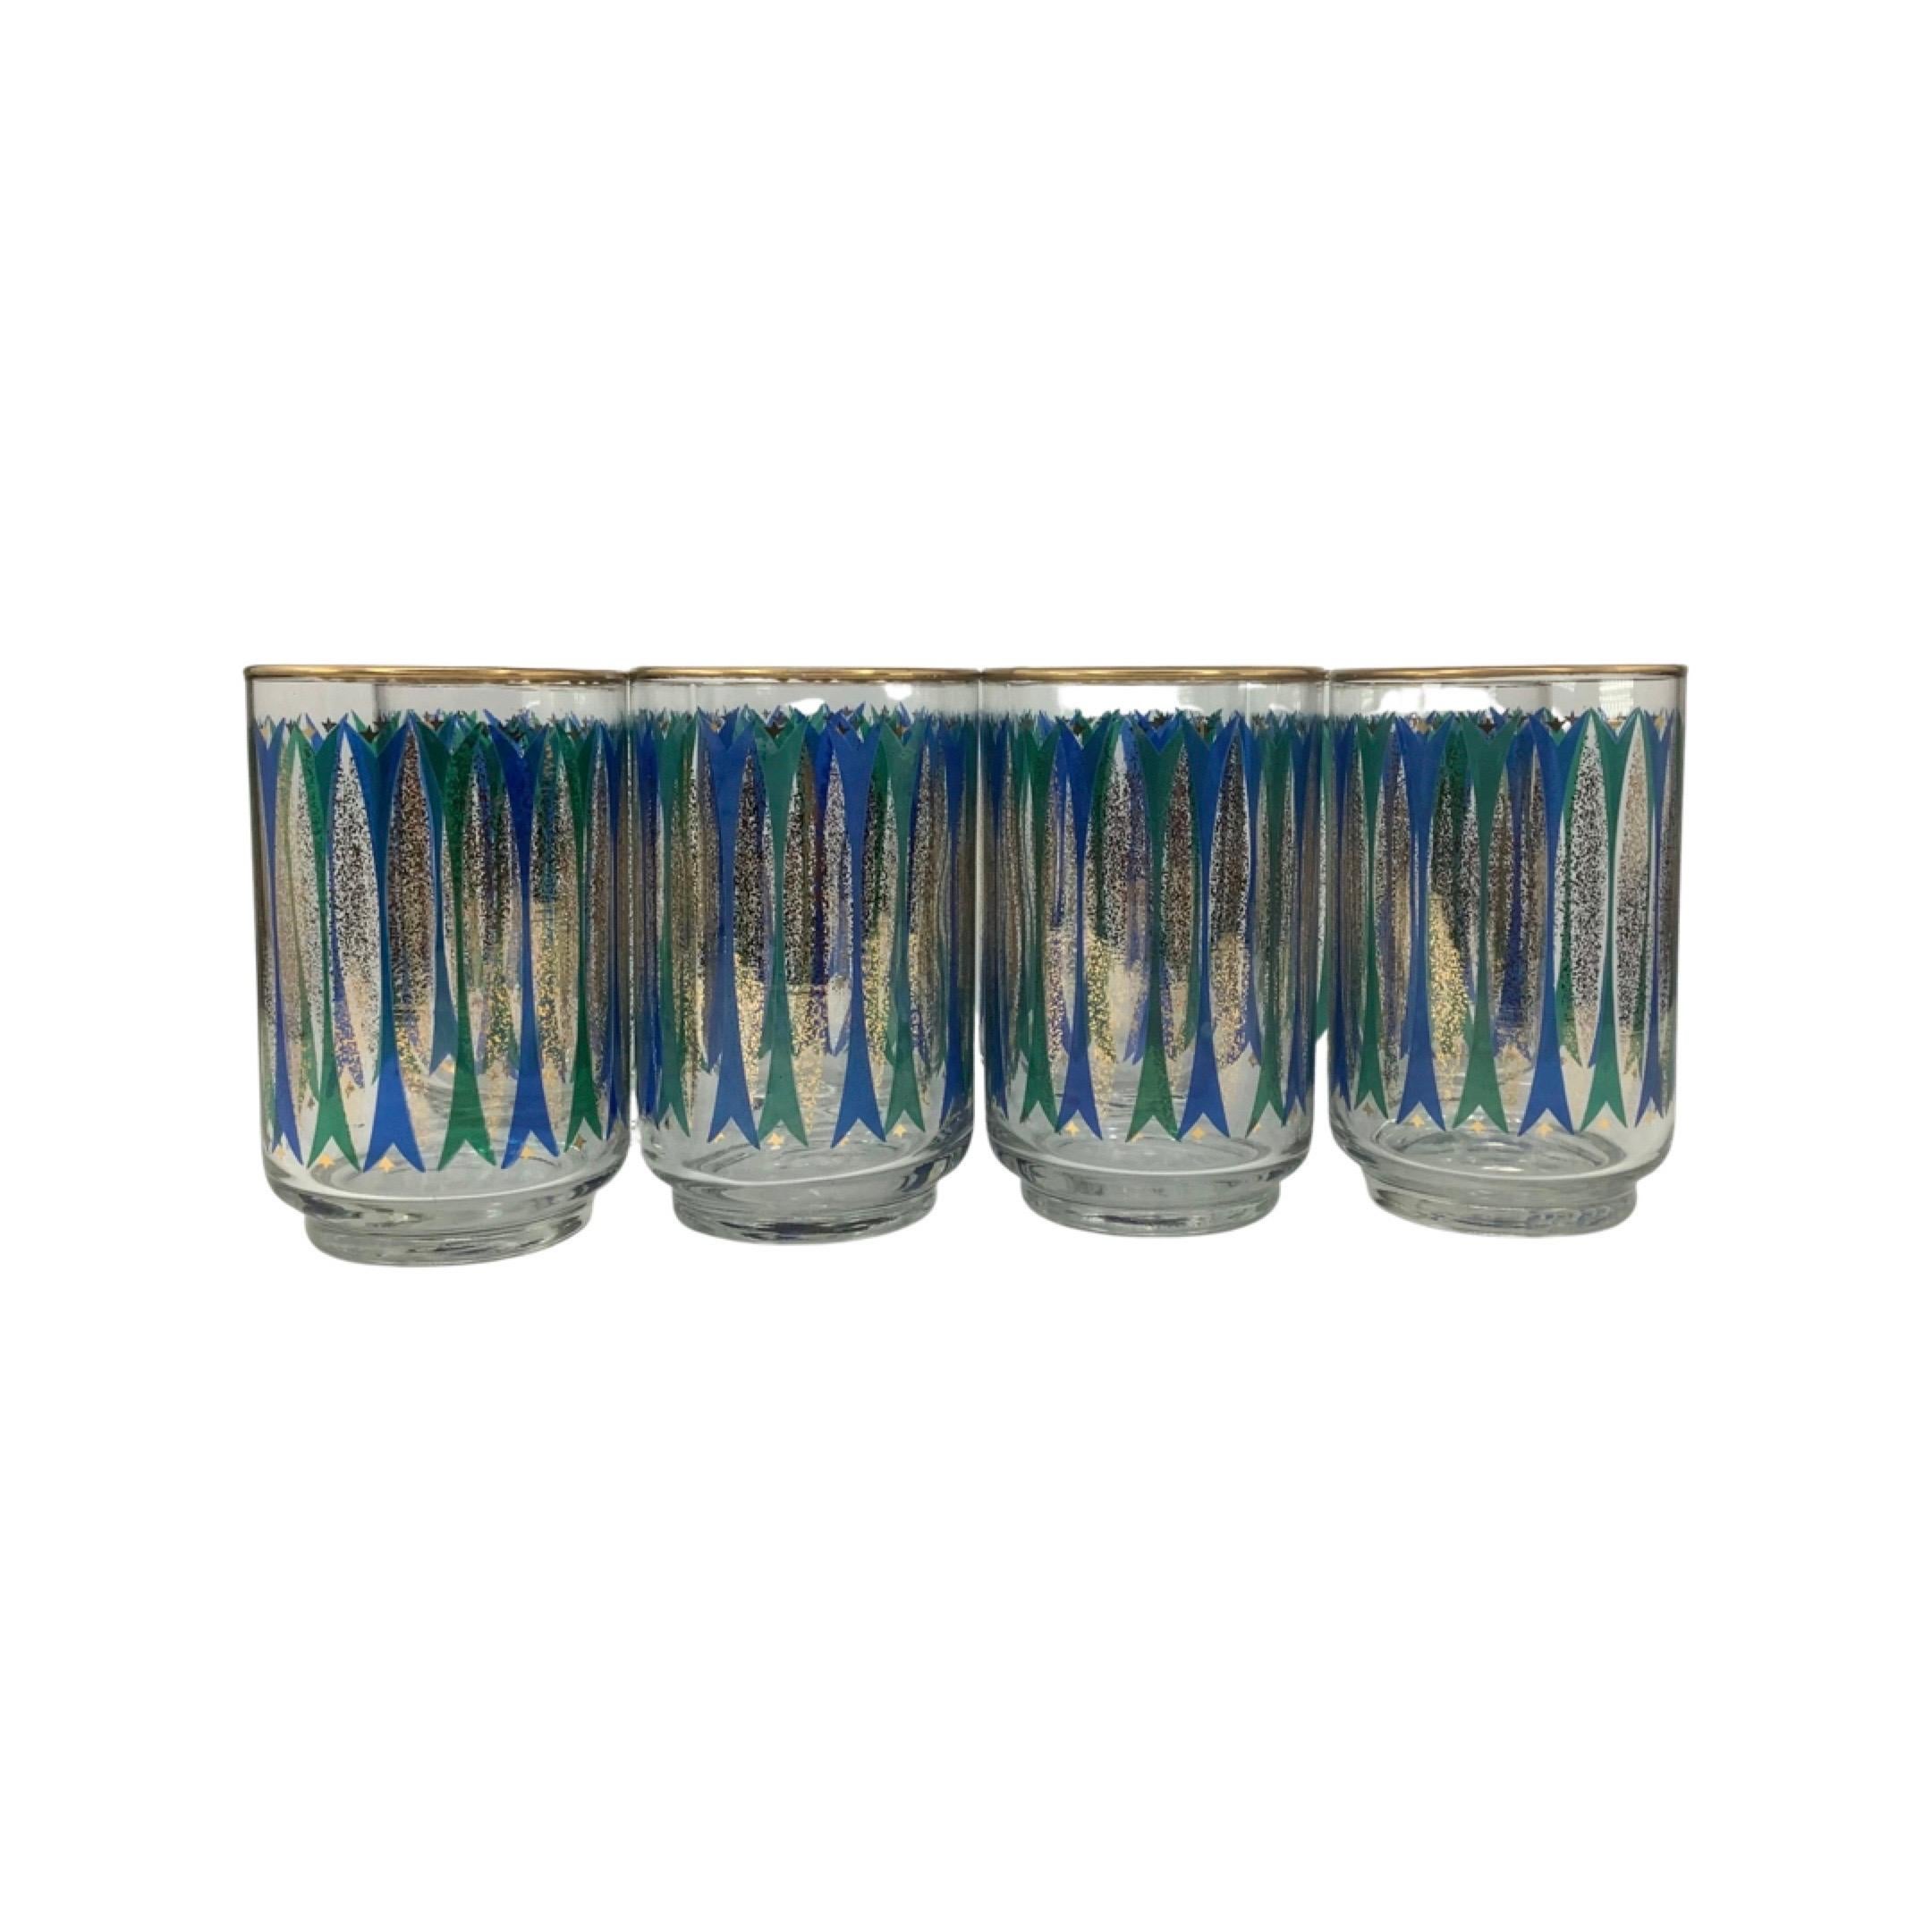 Set of 8 Atomic Libbey Mid - Century Modern Tumblers In Good Condition For Sale In Chapel Hill, NC